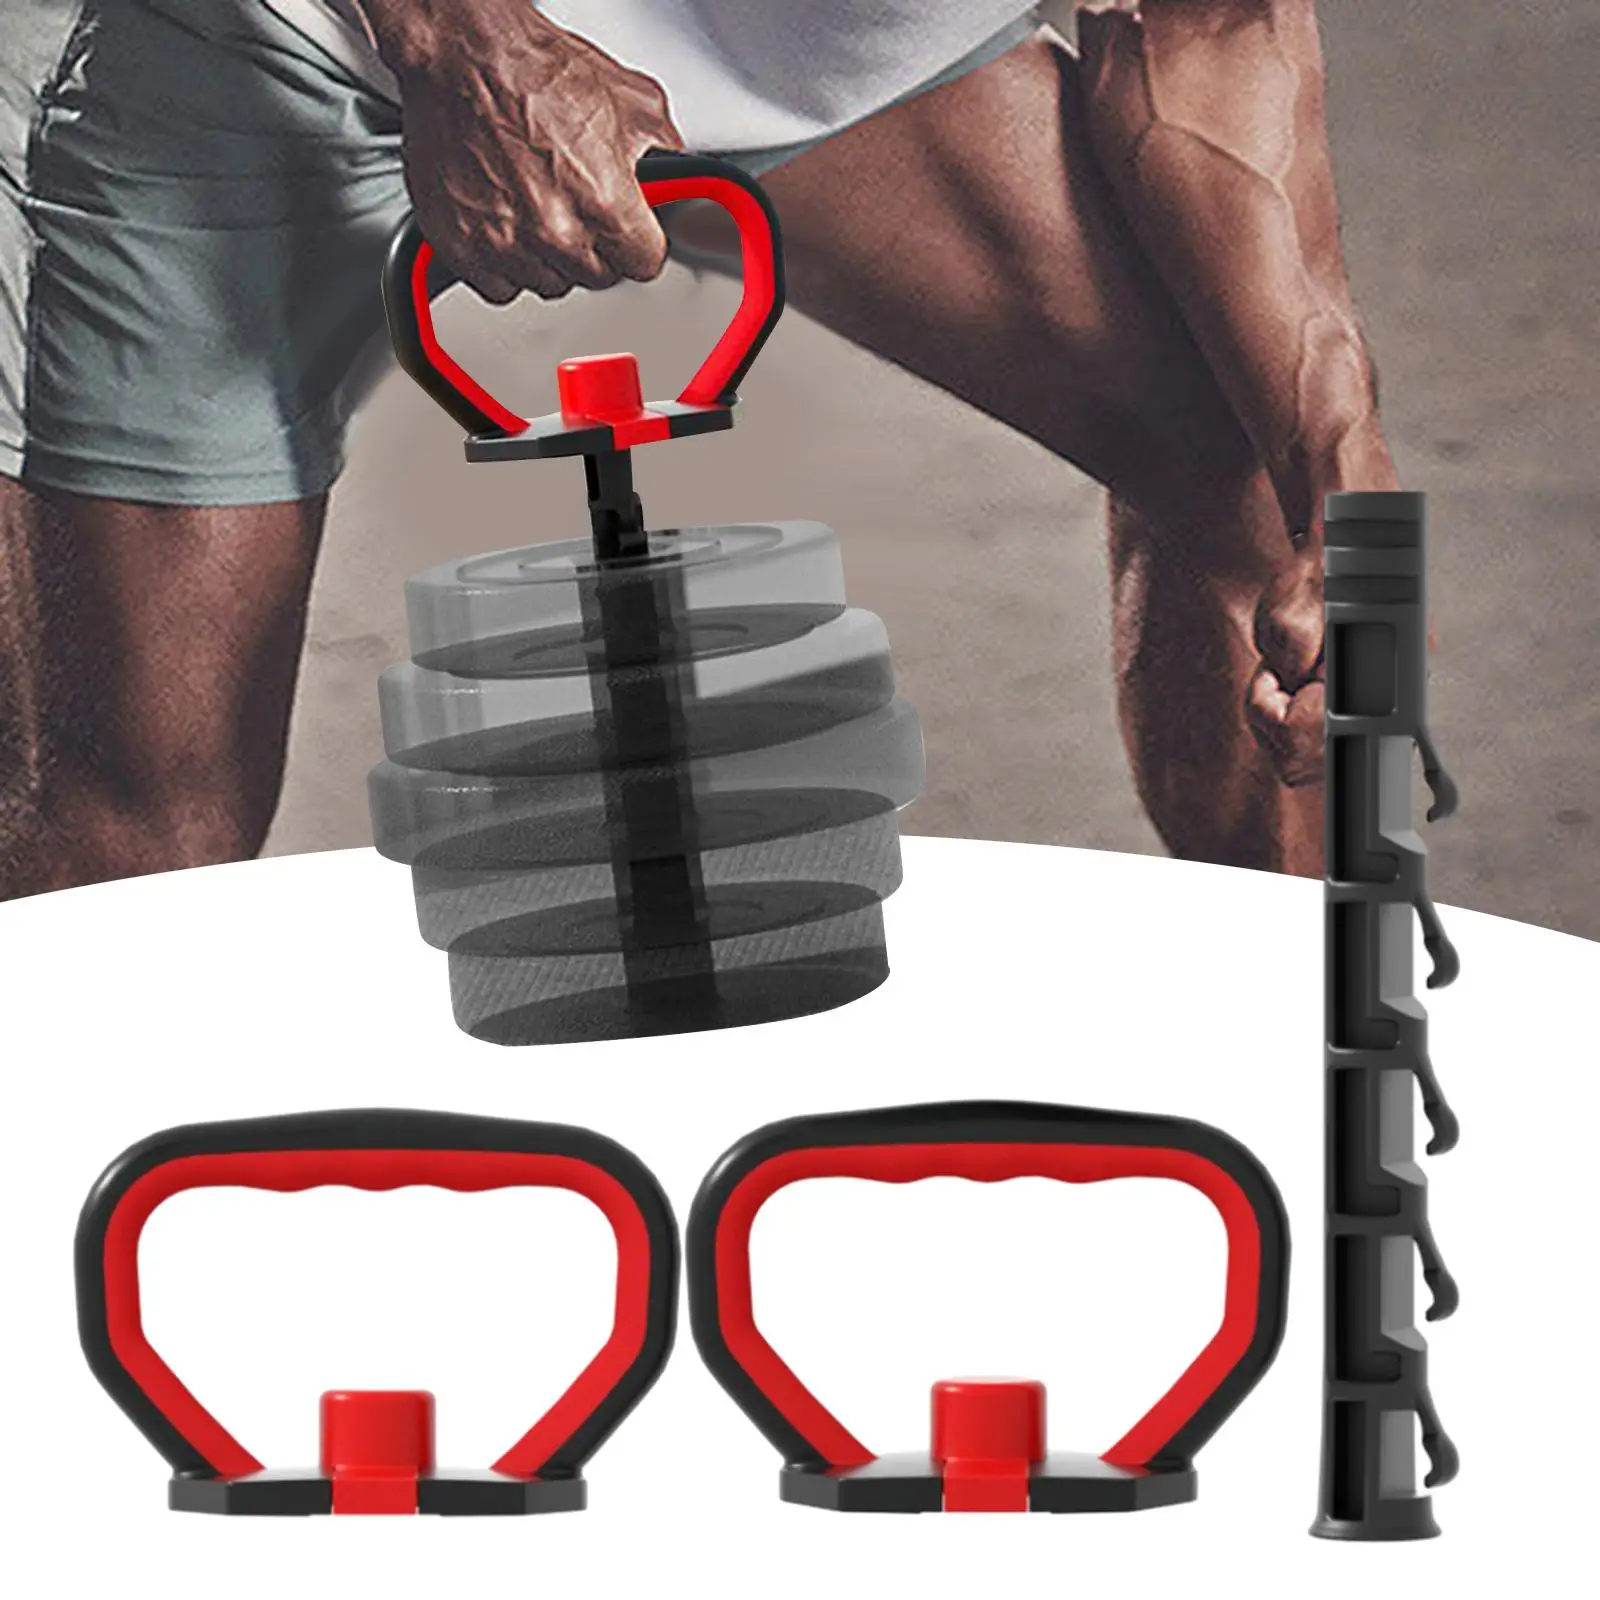 Kettle Bell Grip Handle Adjustable Fitness Strength Training Grips Handle